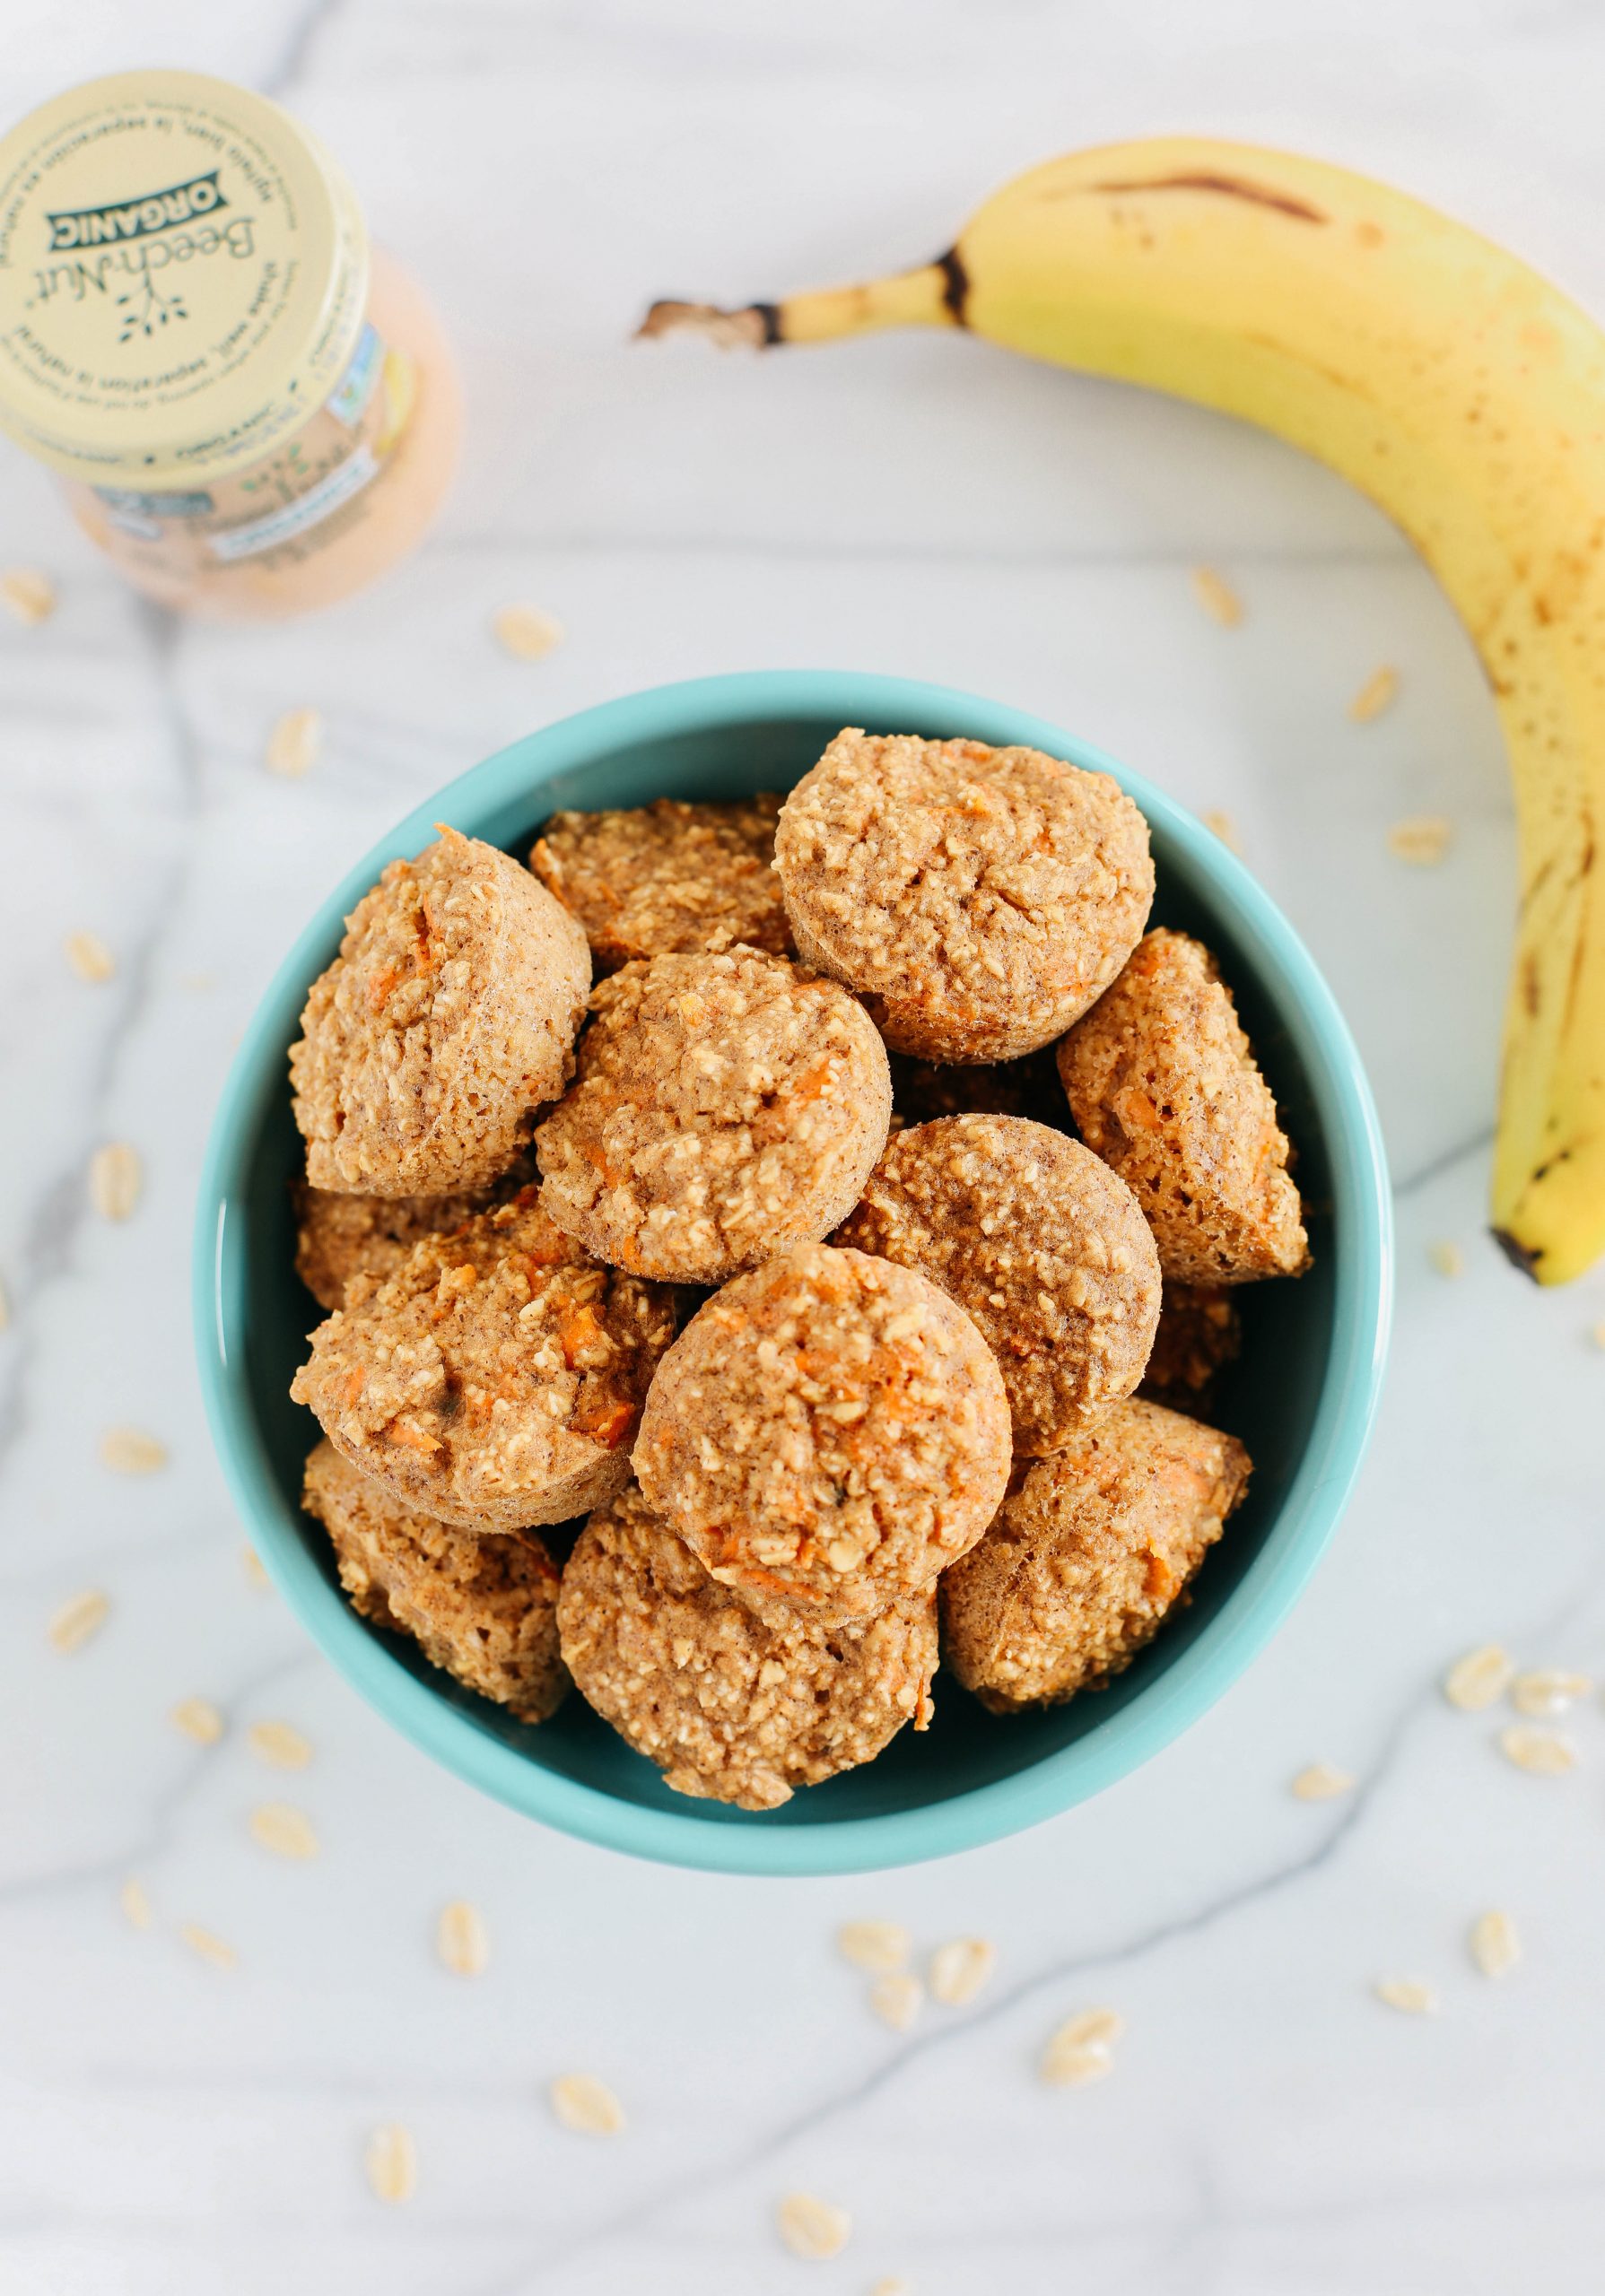 These bite-sized muffins are healthy, nutritious and the perfect way to use up leftover jars of baby food!  No added sugar and your little ones will love them!